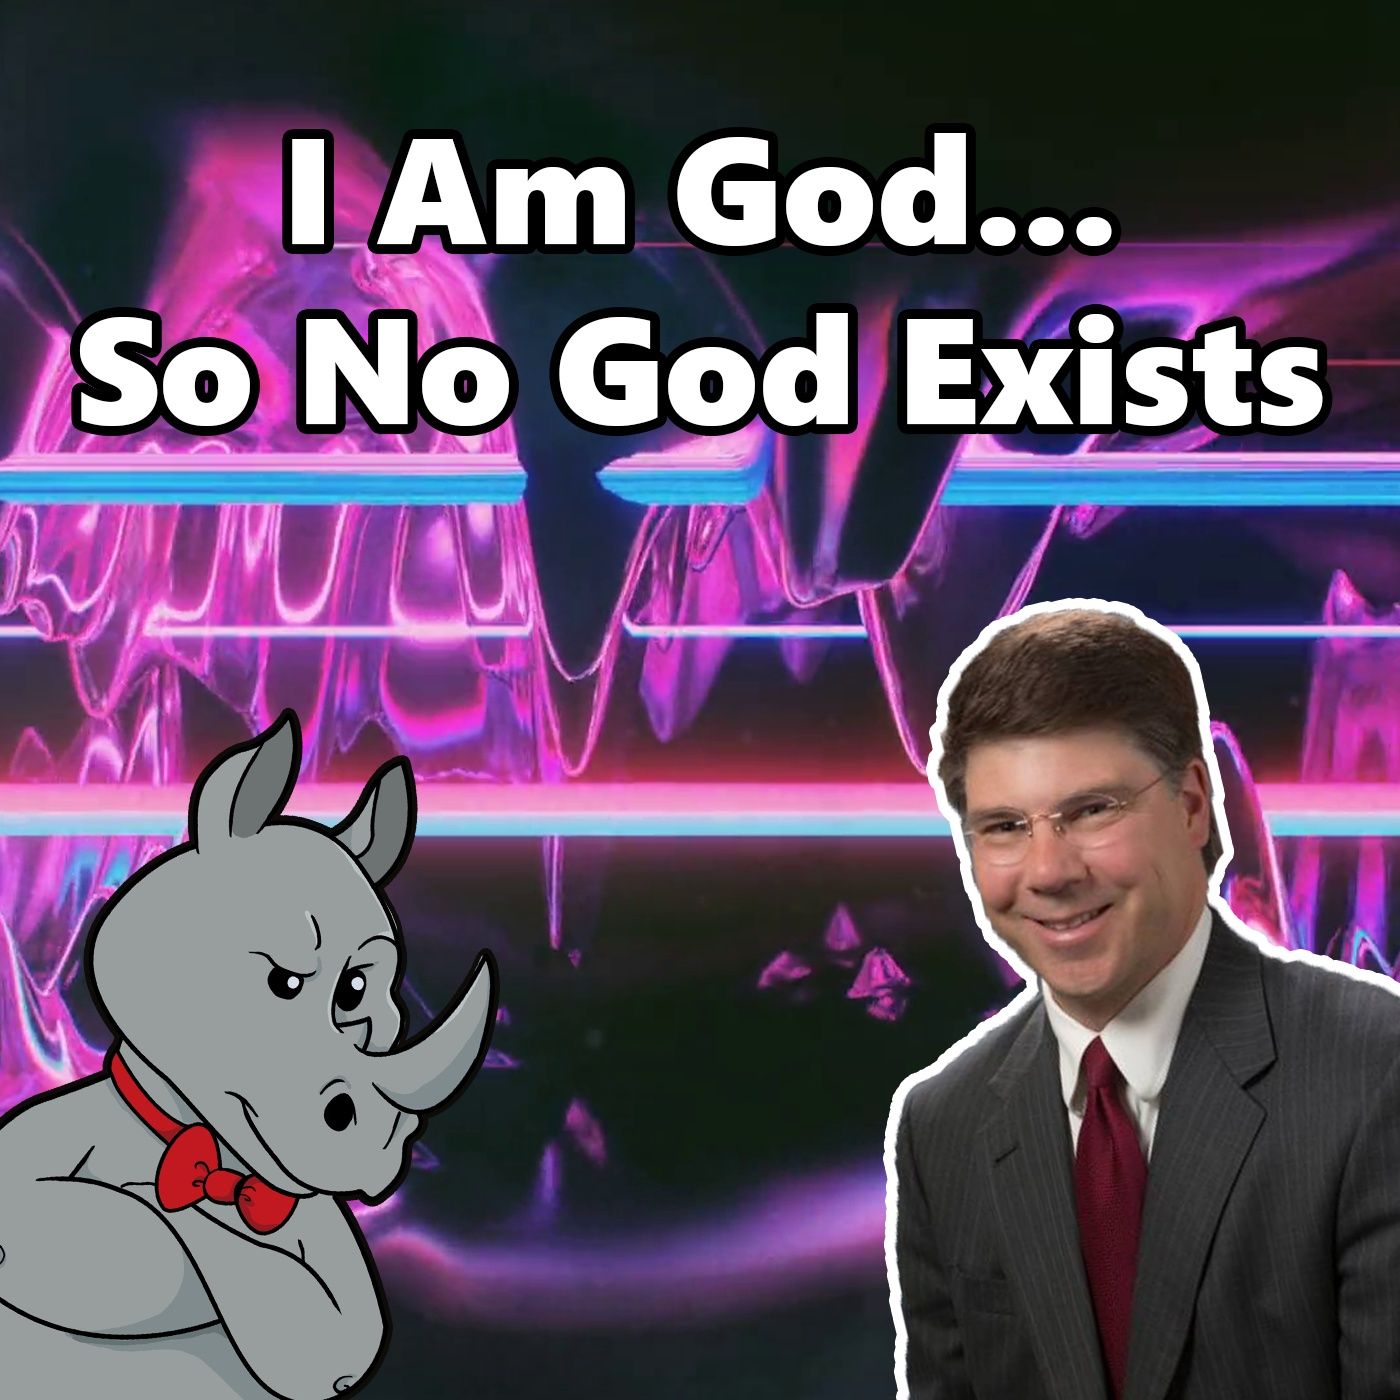 If I Say I'm God, You Have to Believe Me!